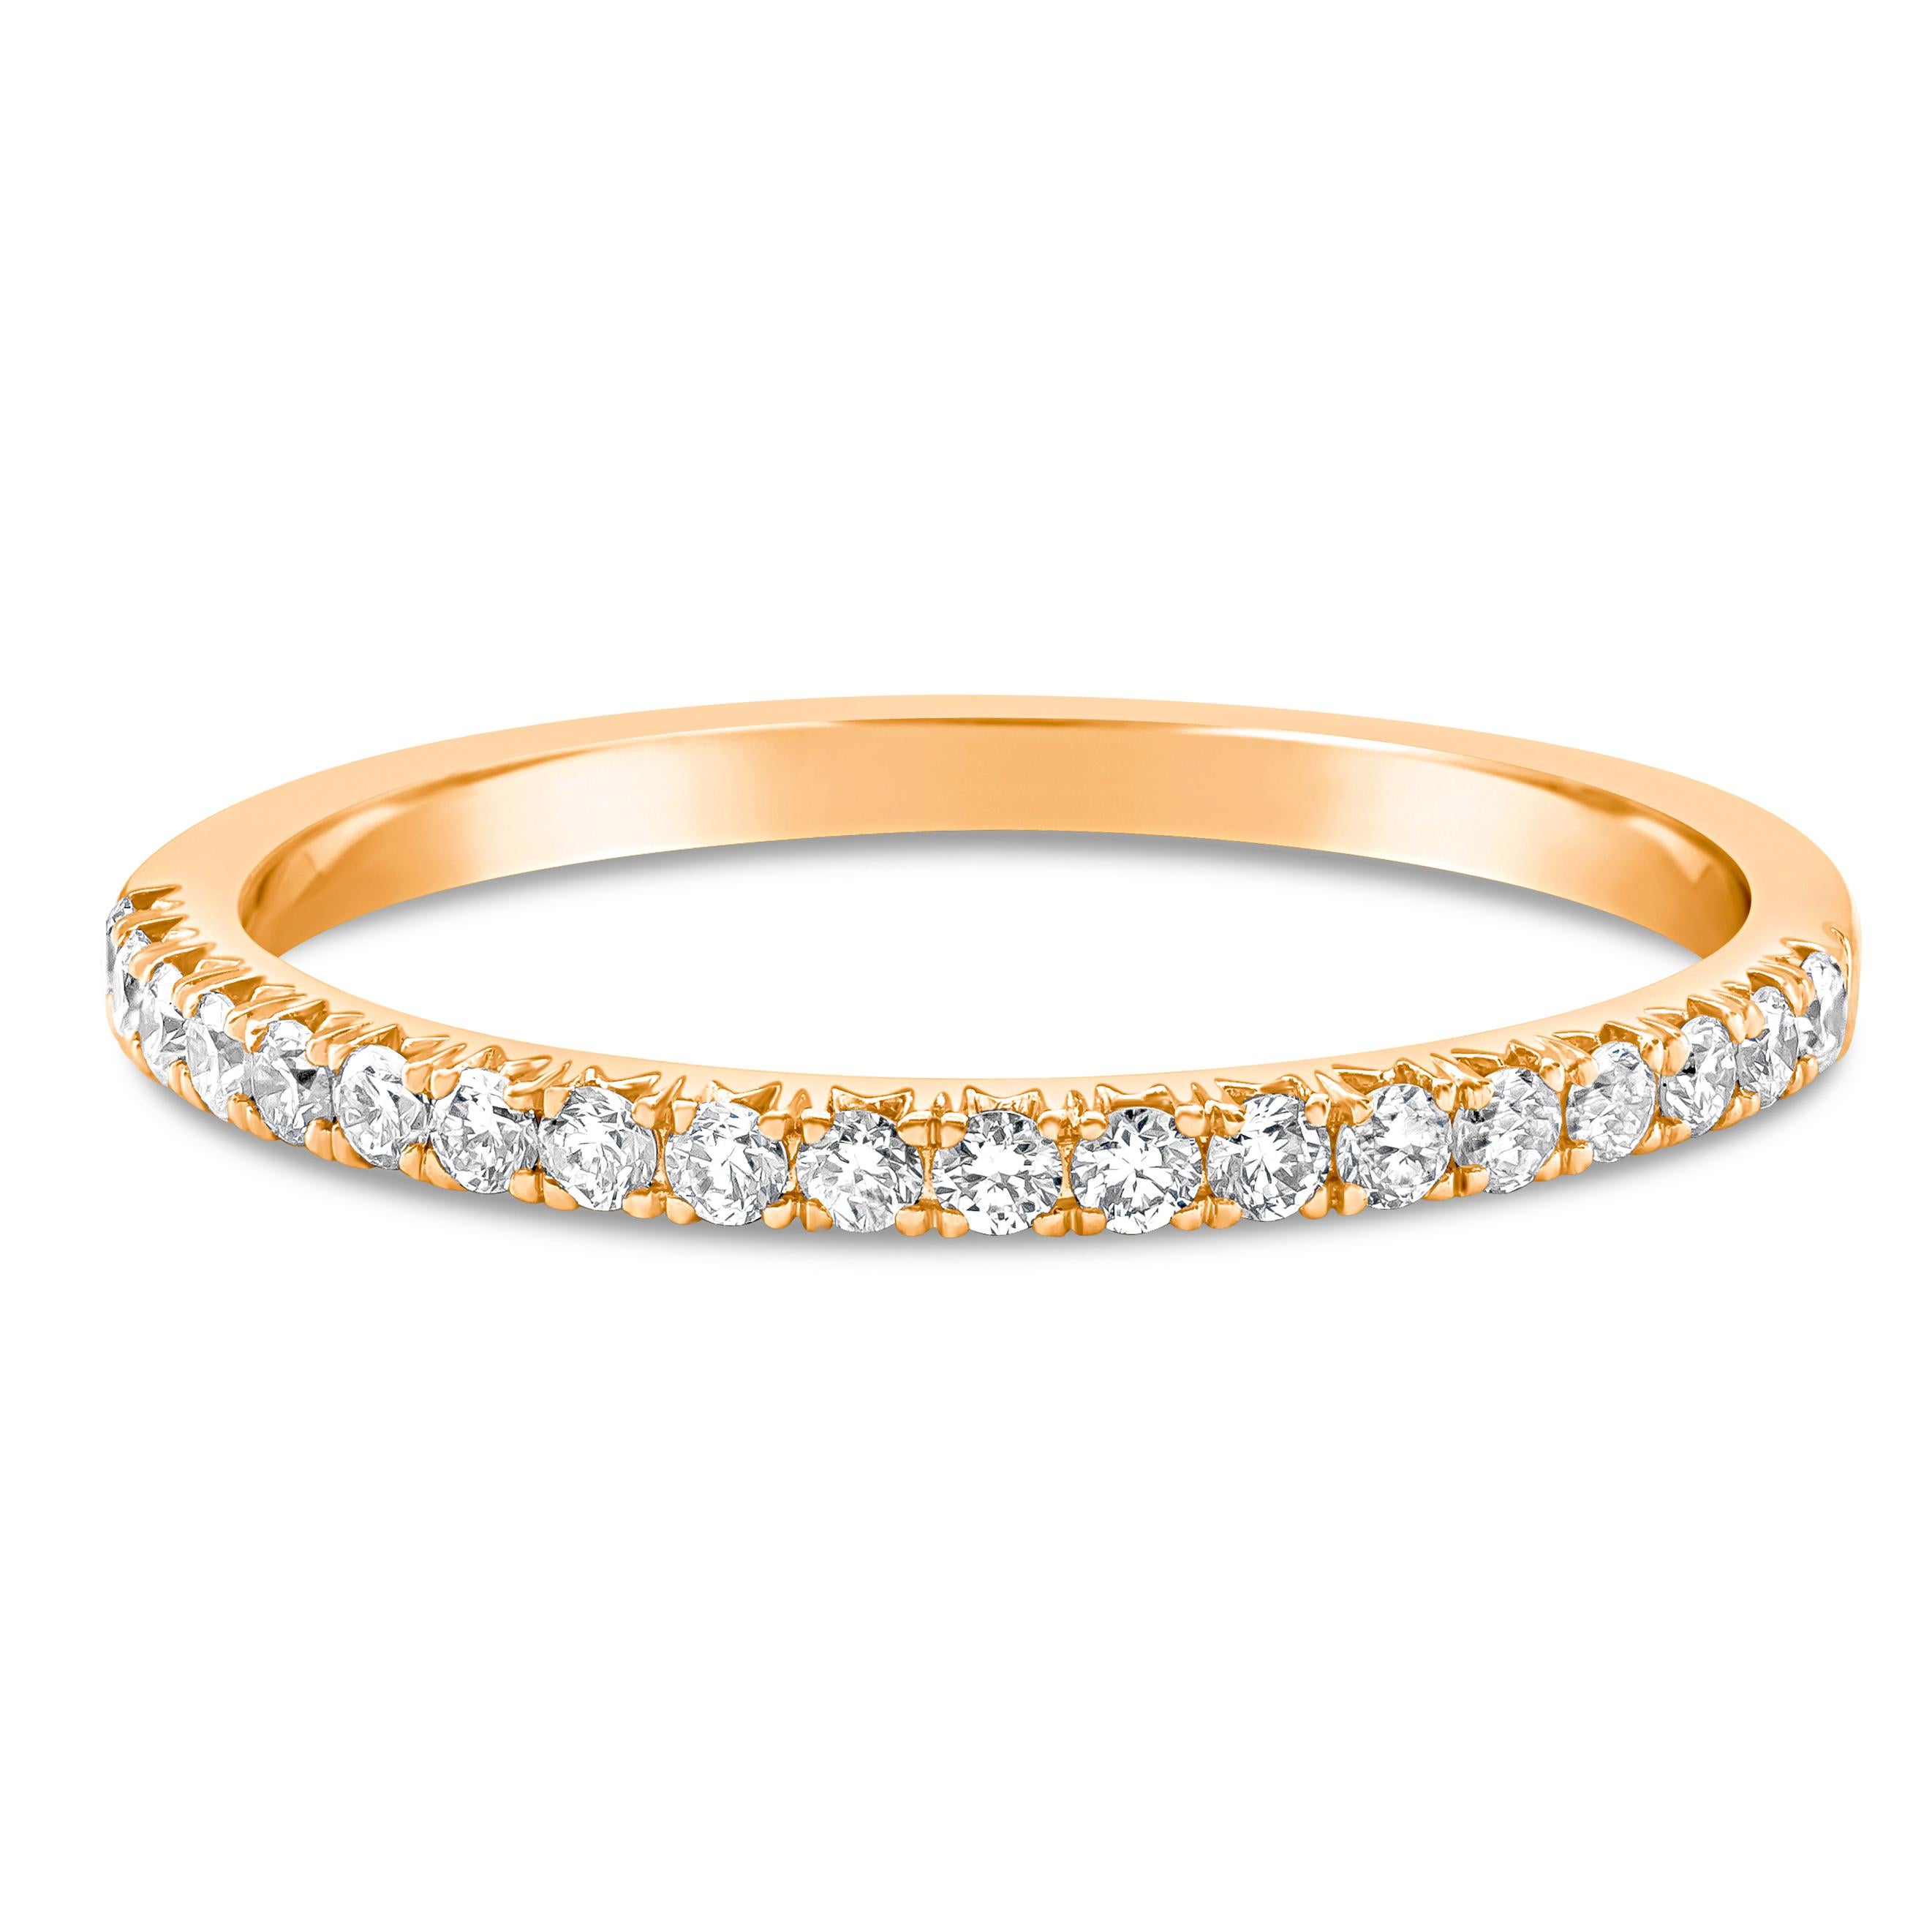 A simple and classic wedding band style showcasing round brilliant diamonds set in a french pave setting, Diamonds weigh 0.25 carats total. Made with 18K Rose Gold
Size 6.5 US.

Style available in different price ranges. Prices are based on your